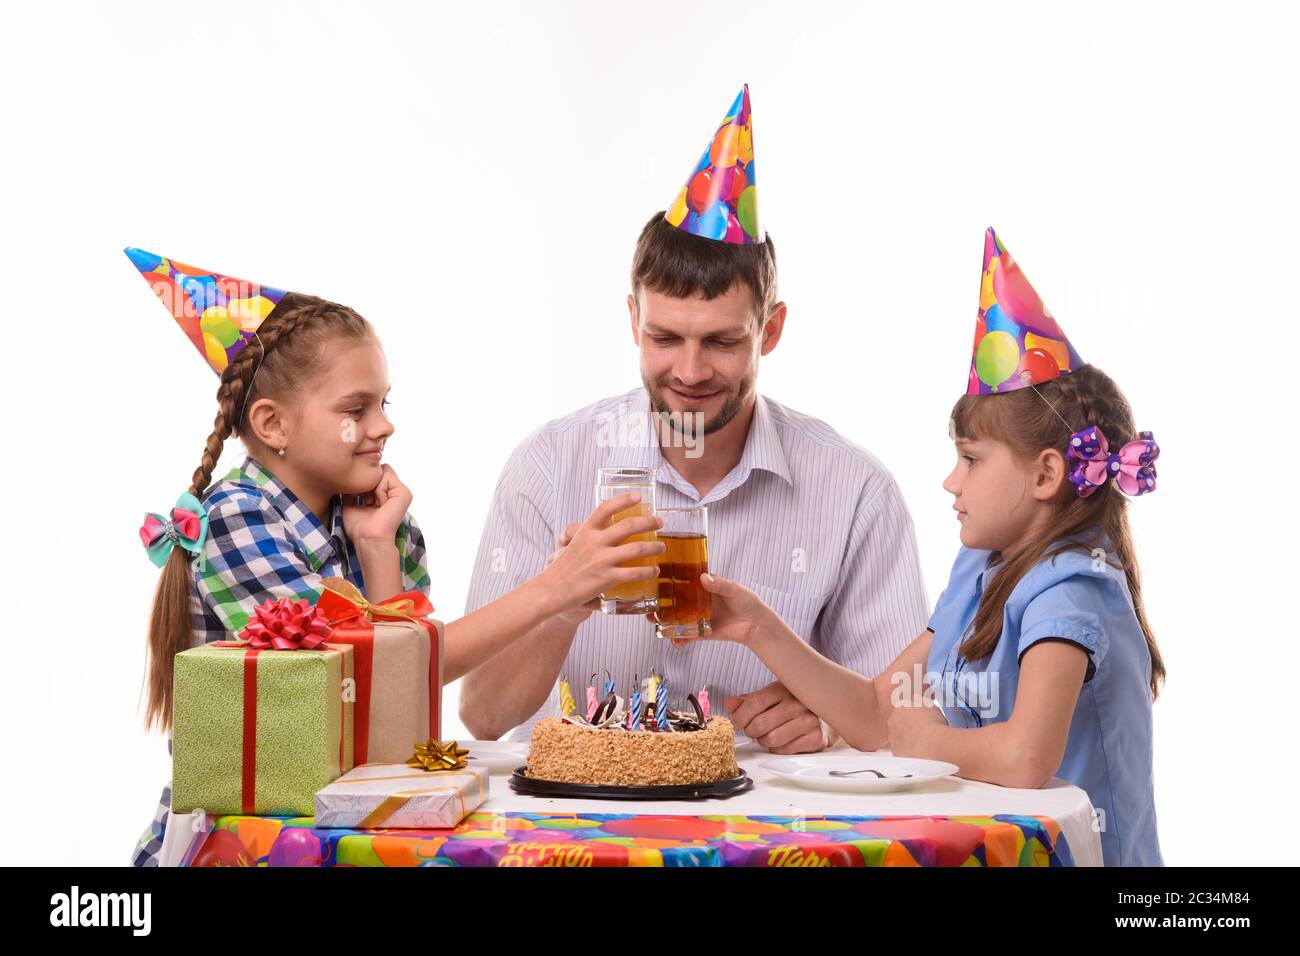 Kids and dad joyfully banging glasses of juice at a birthday party Stock Photo